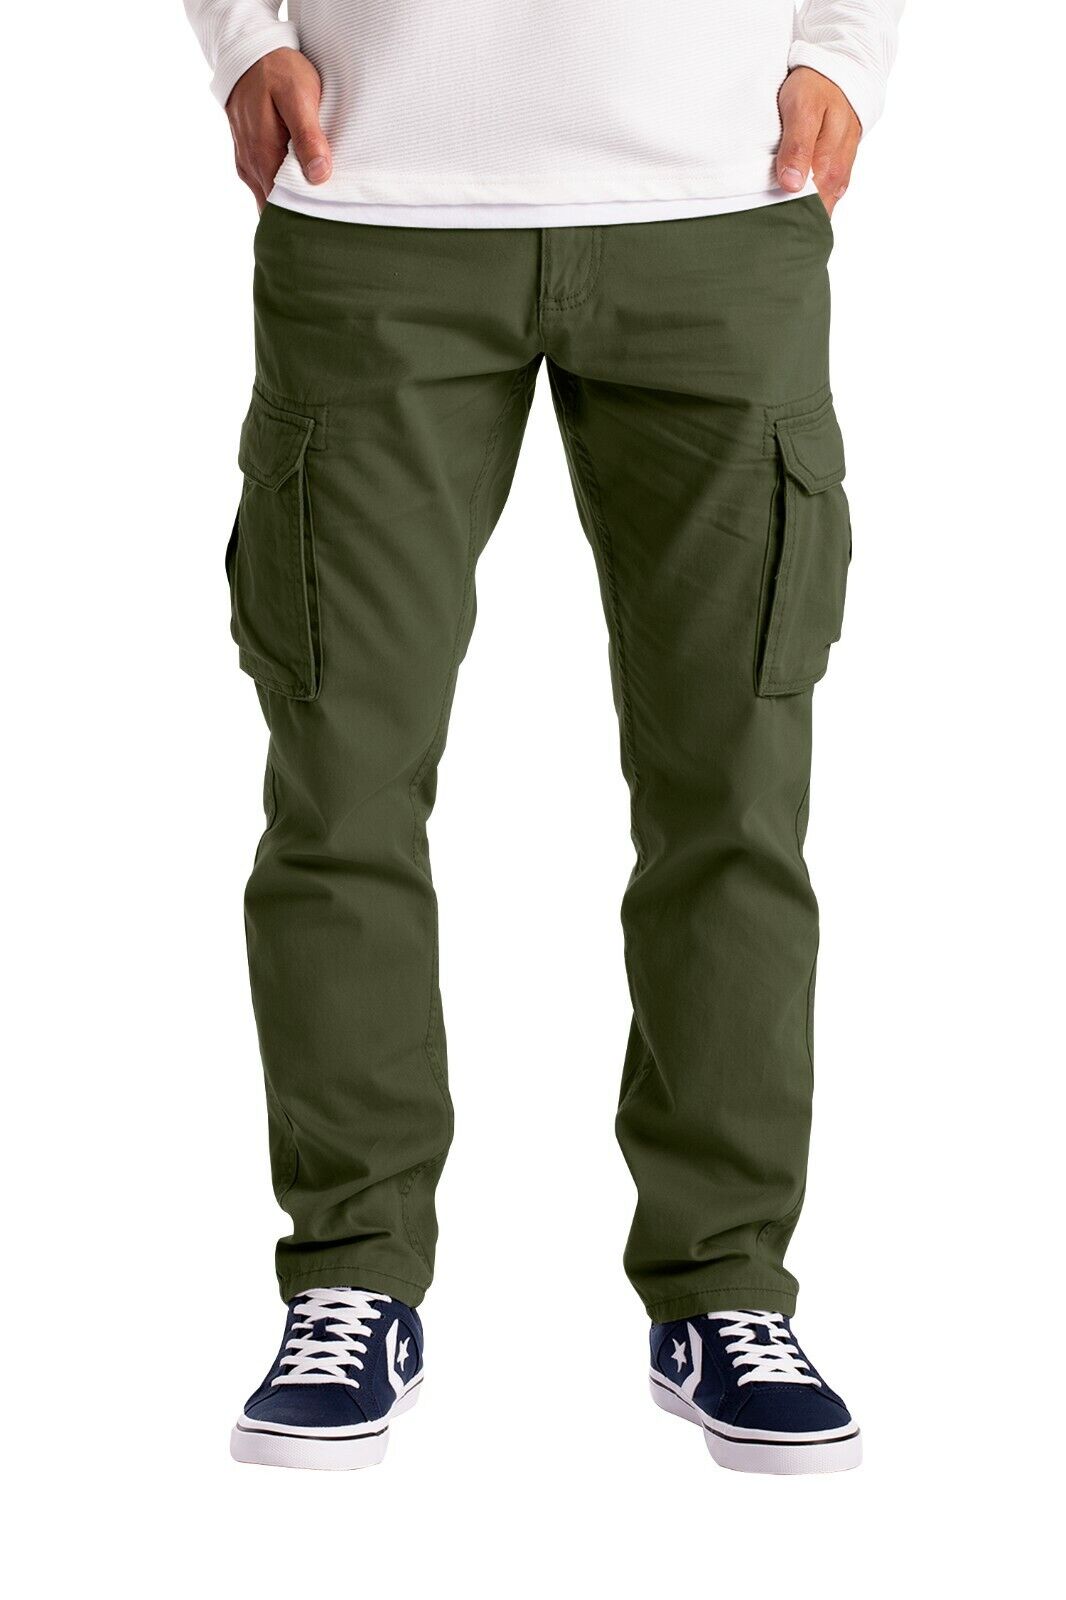 Mens Cargo Trousers Work Wear Combat Safety Cargo 6 Pocket Full Pants ...